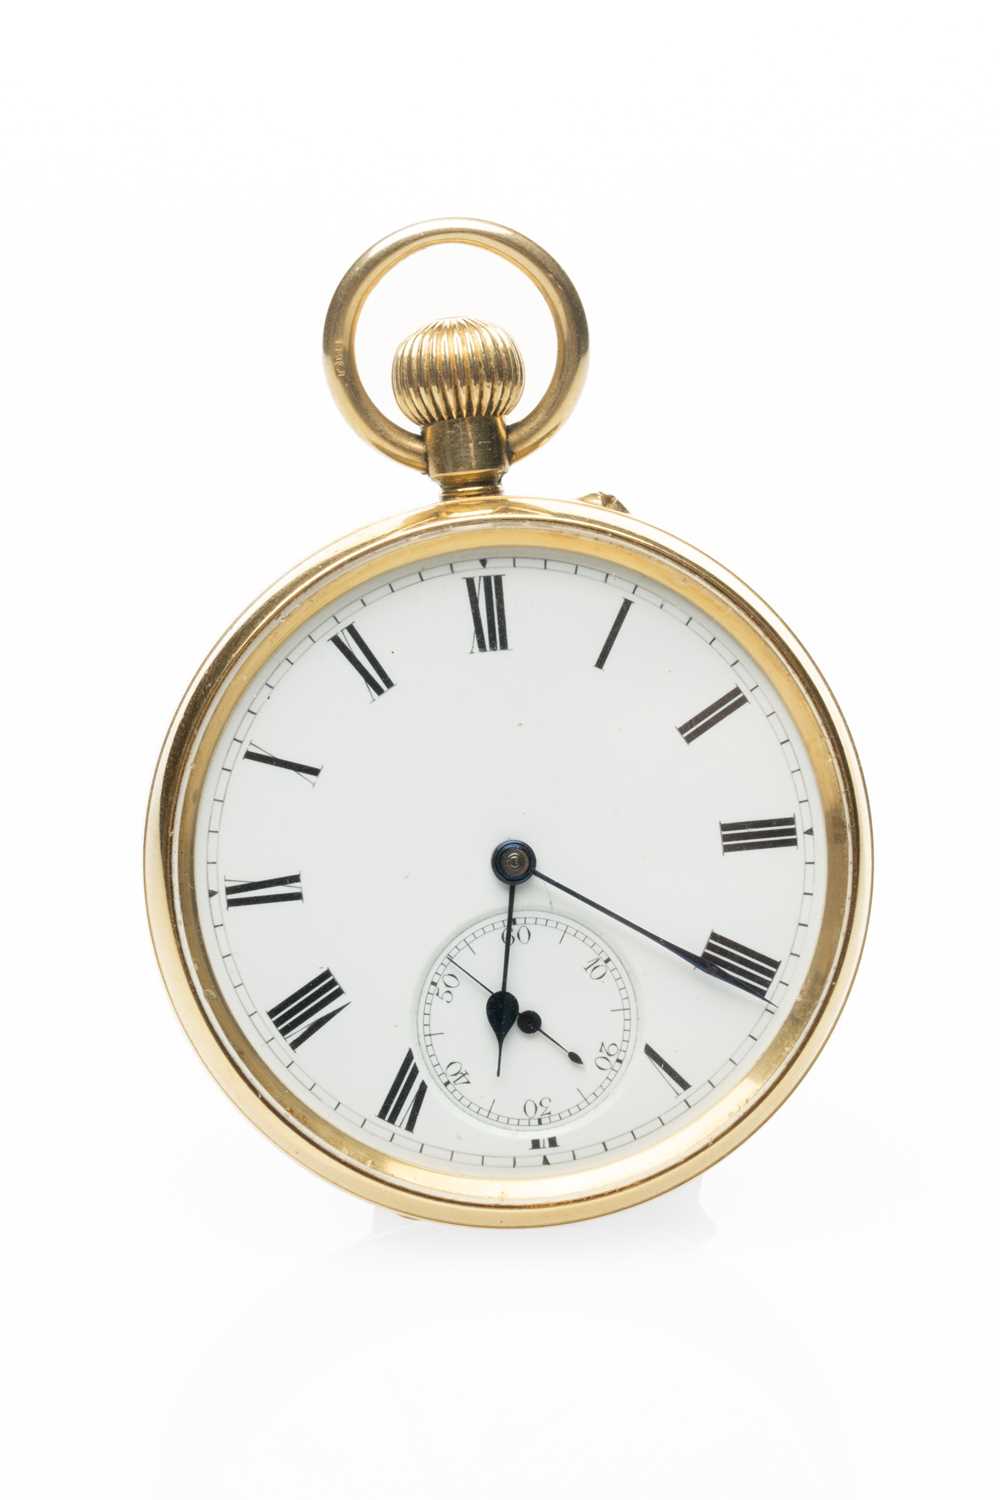 18CT GOLD OPEN FACE POCKET WATCH, white enamel dial with Roman numerals and subsidiary seconds dial,